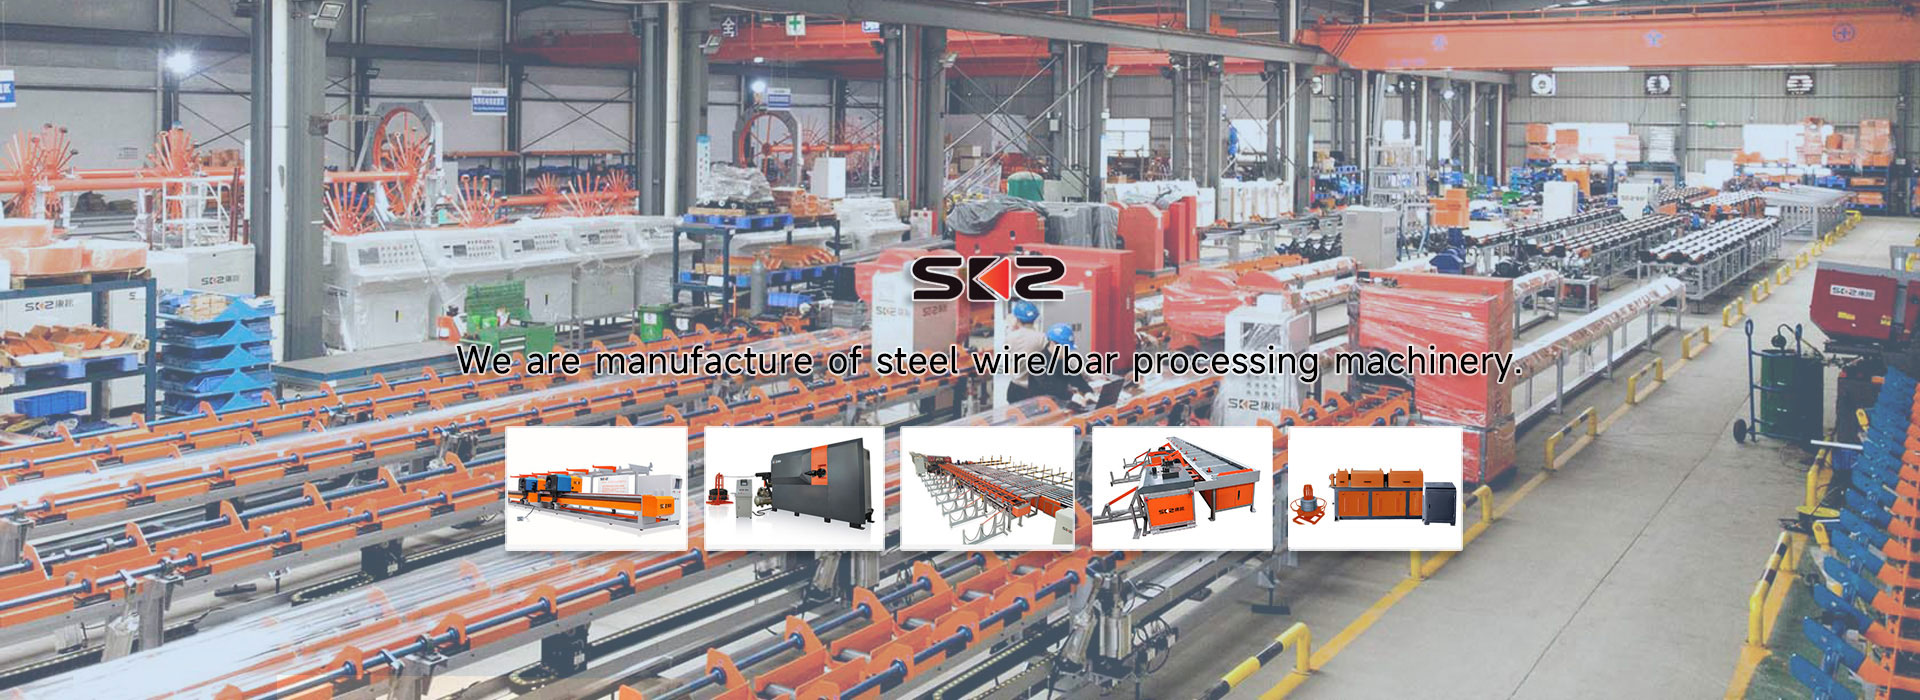 SKZ are manufacture of steel wire/bar processing machinery.